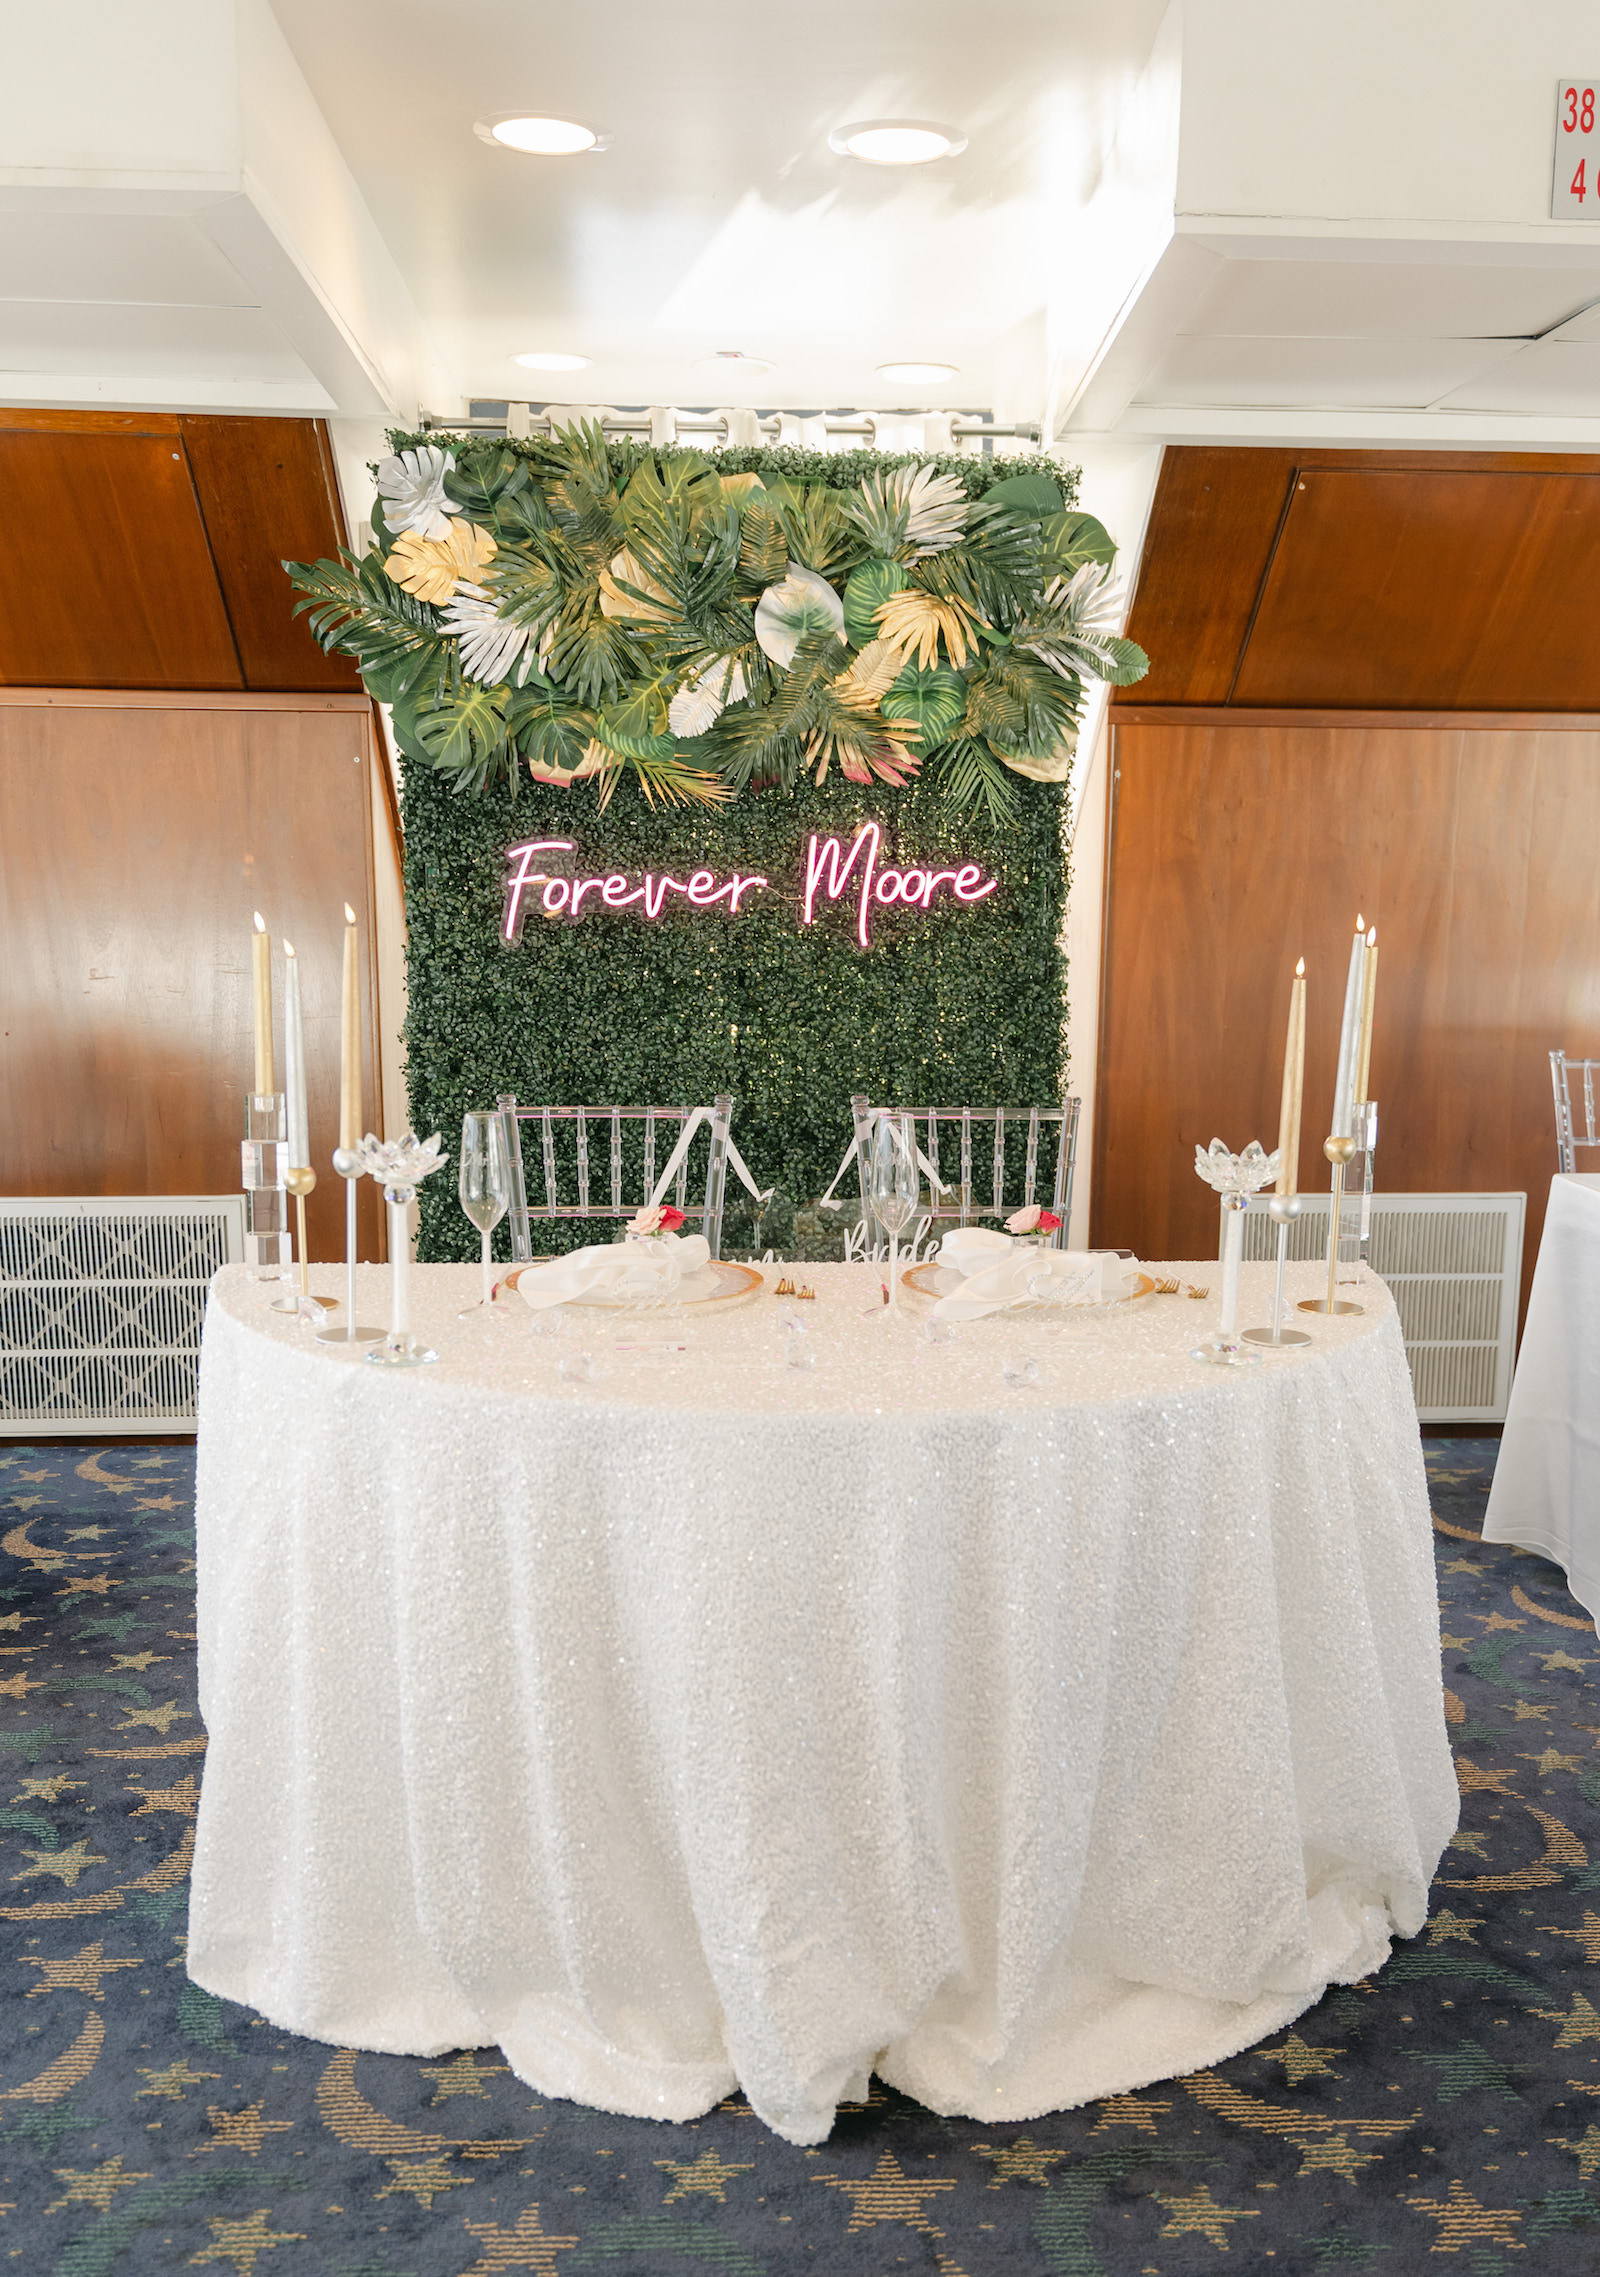 Tropical Modern Wedding Reception Decor, Greenery Hedge Wall with Pink Neon Sign with Monstera and Palm Fronds Arrangement, Sweetheart Table with White Table Linen, Candlesticks | Tampa Bay Wedding Rentals Kate Ryan Event Rentals